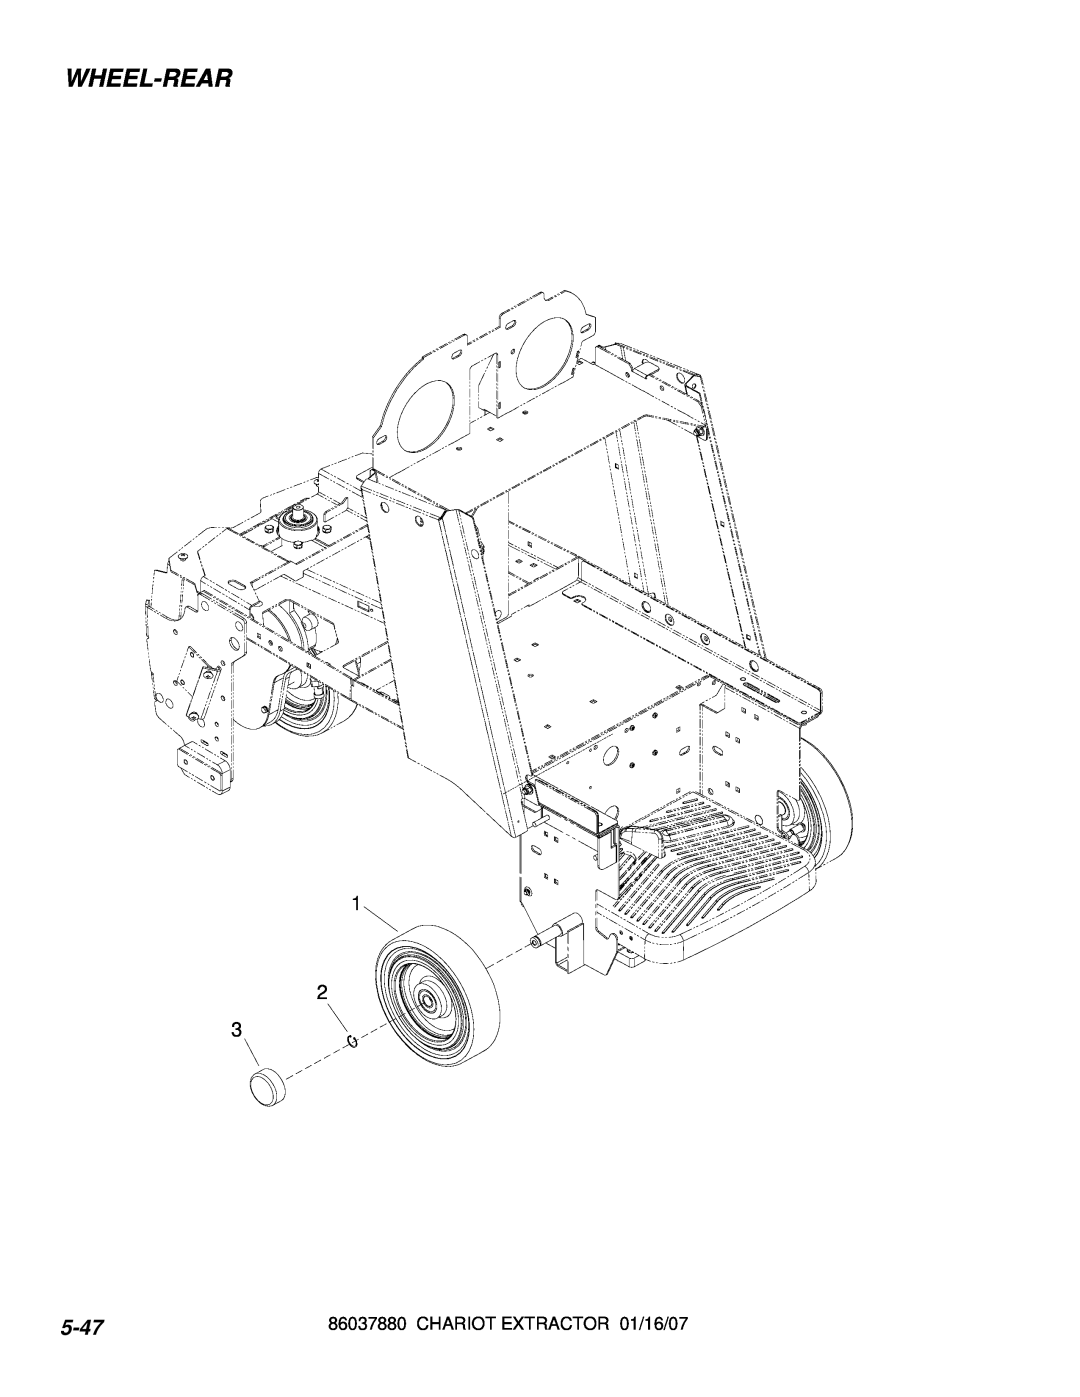 Windsor CEE24, 86037880, CE24X manual Wheel-Rear, 5-47, 1 2, CHARIOT EXTRACTOR 01/16/07 